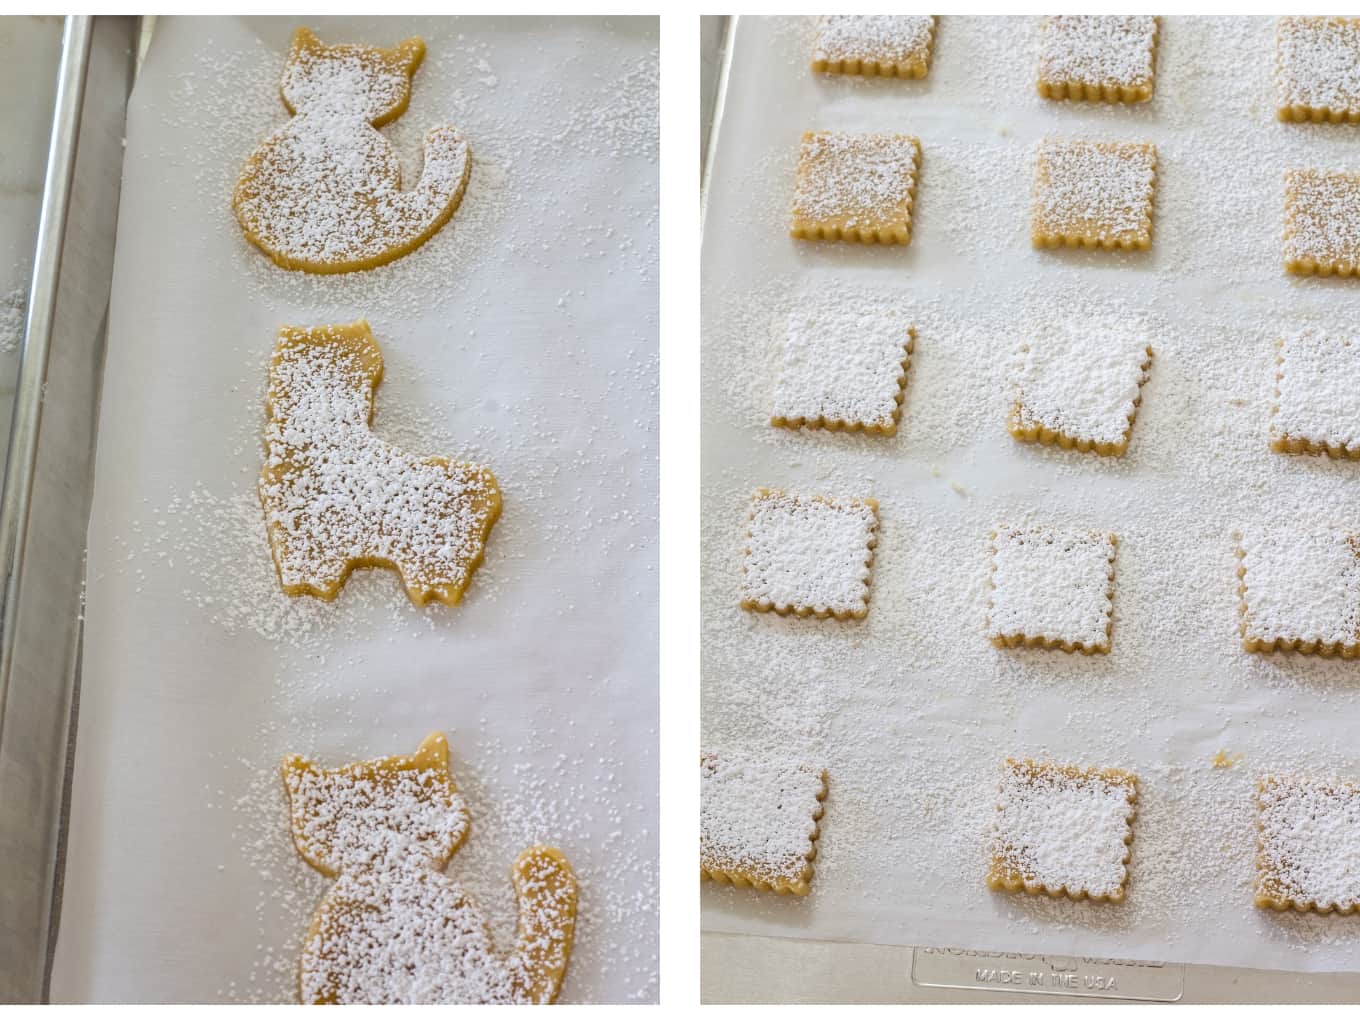 Side by side images of the llama and cat shape on one and the square cookies on the other, they are sprinkled with the cinnamon sugar mixture and ready to go into the oven.